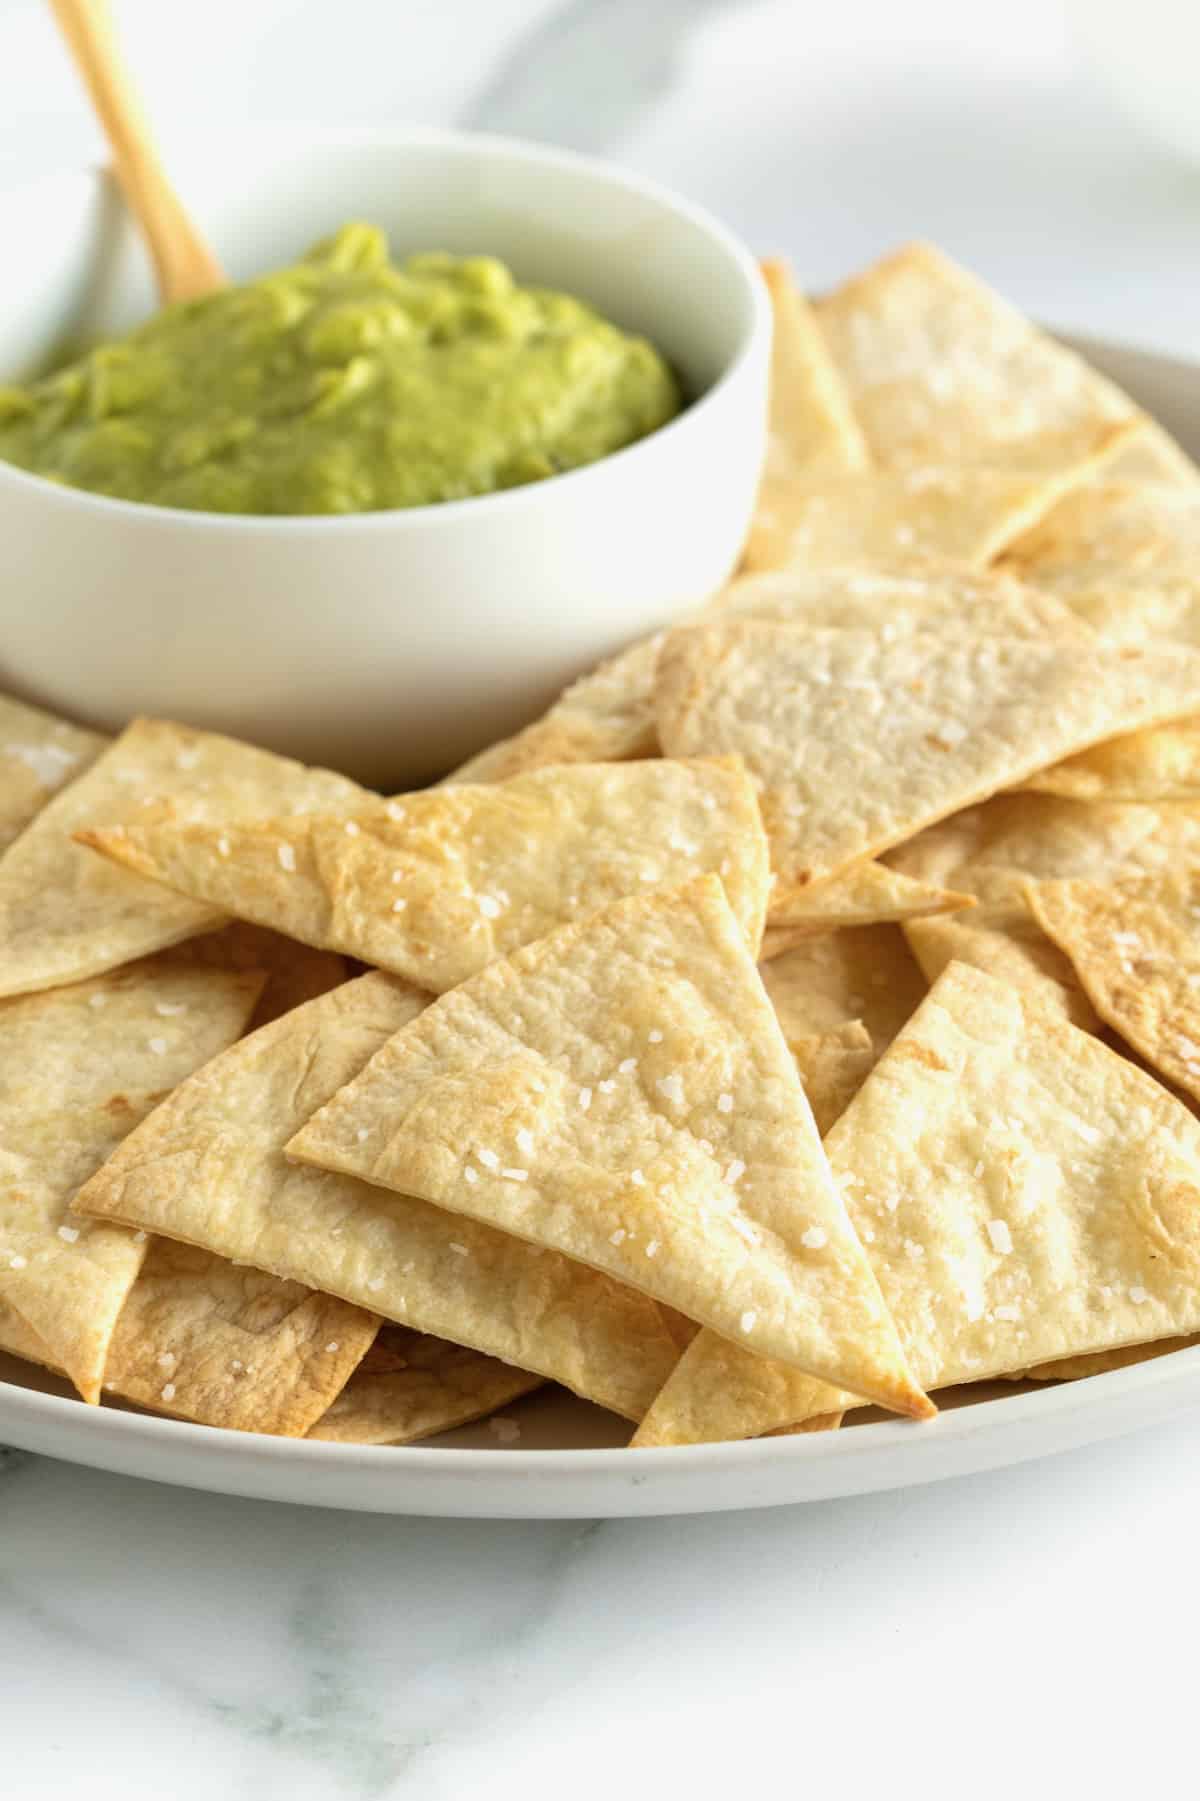 A plate of baked flour tortilla chips with a bowl of guacamole.